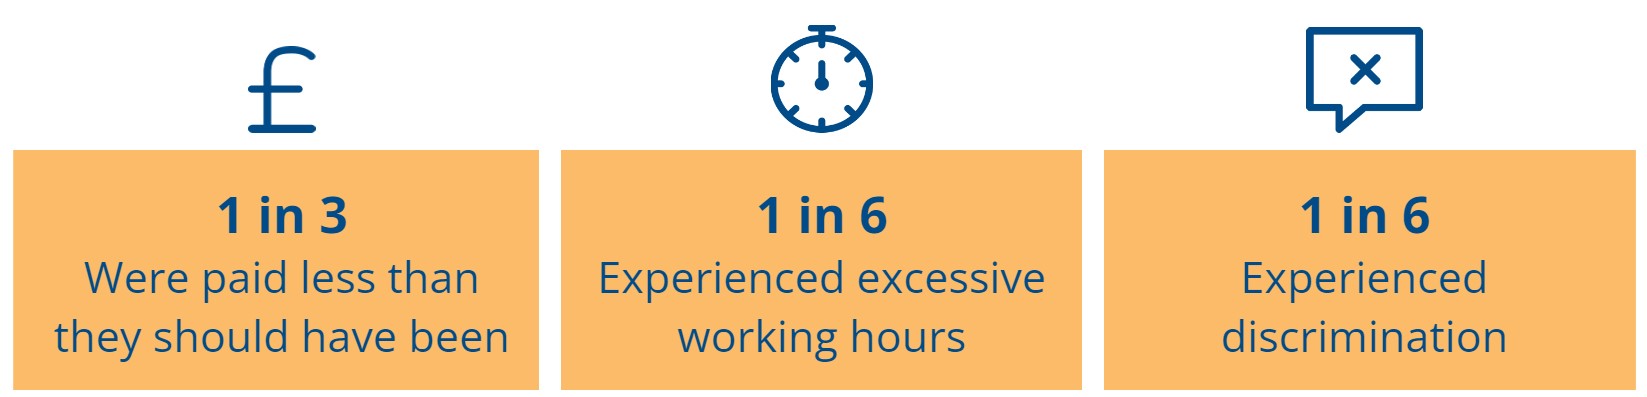 1 in 3 were paid less than they should have been, 1 in 6 experienced excessive working hours, and 1 in 6 experienced discrimination